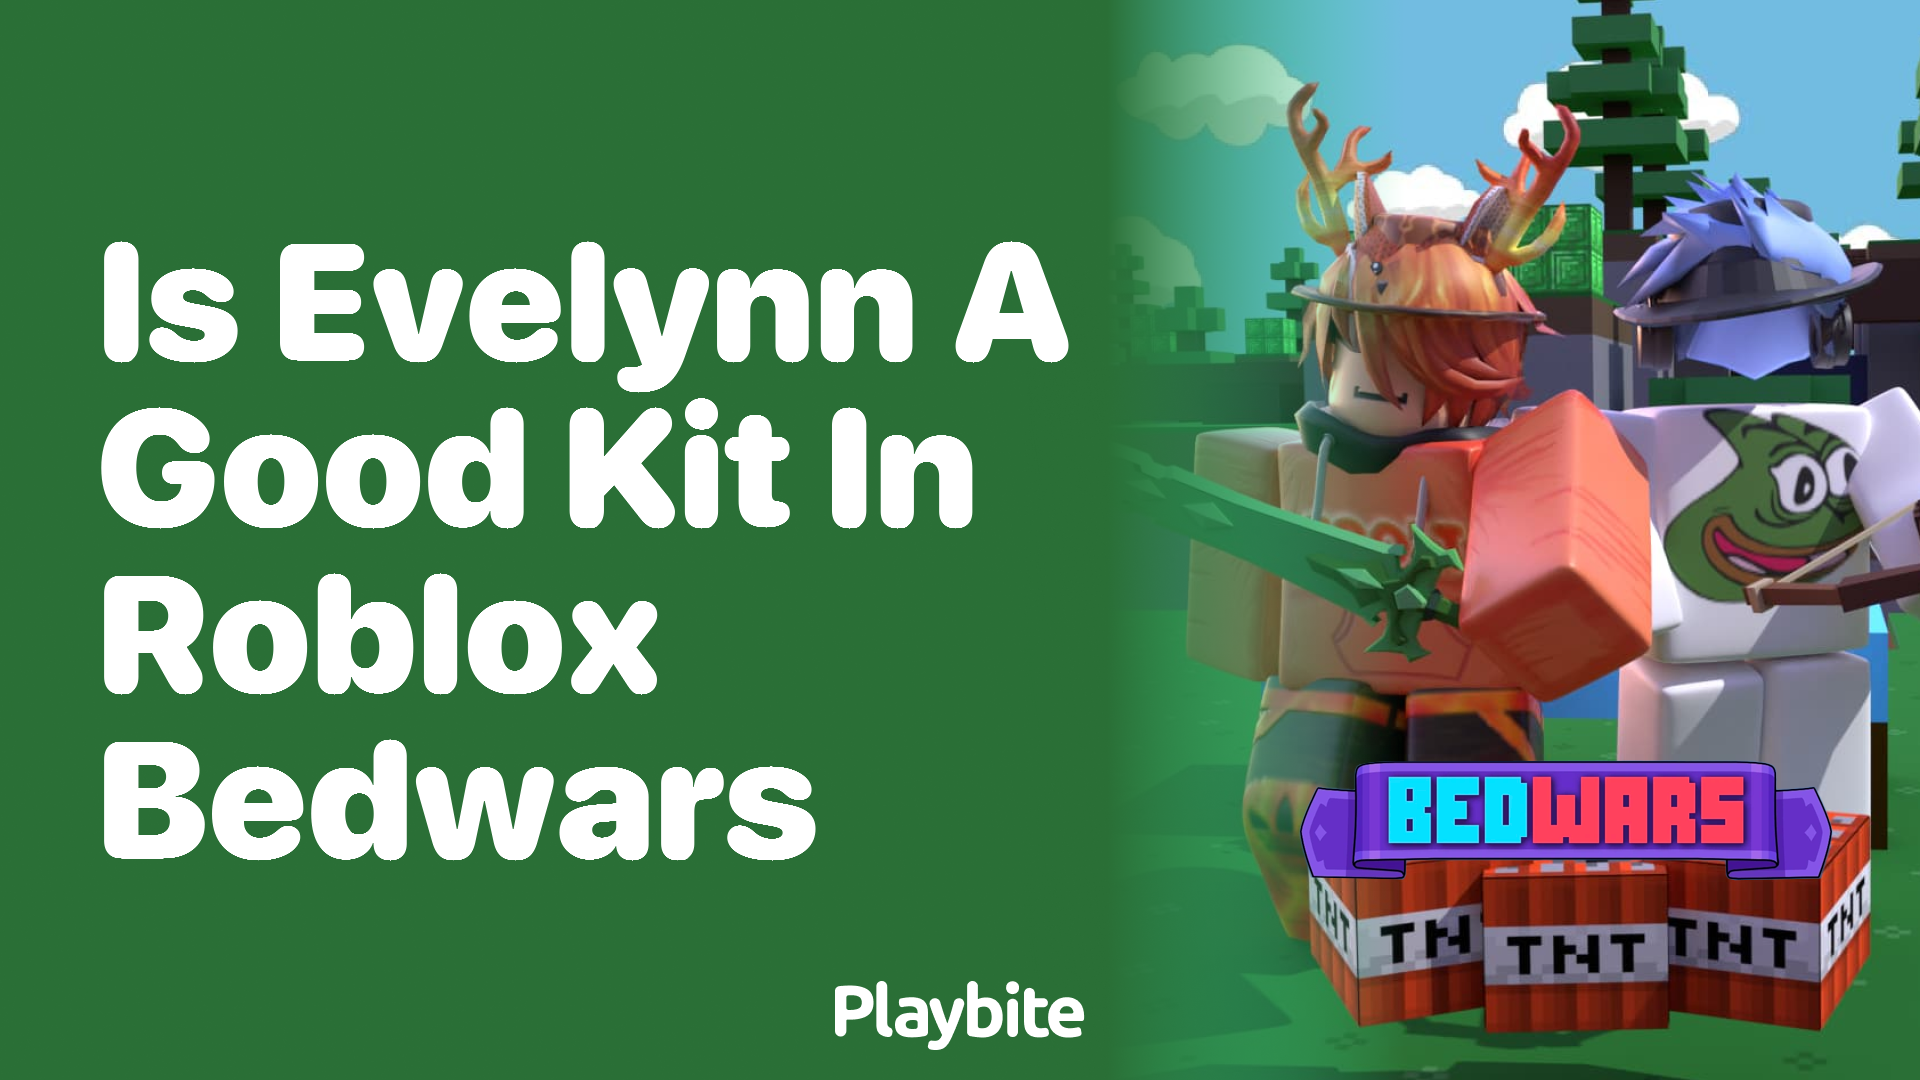 Is Evelynn a Good Kit in Roblox Bedwars?